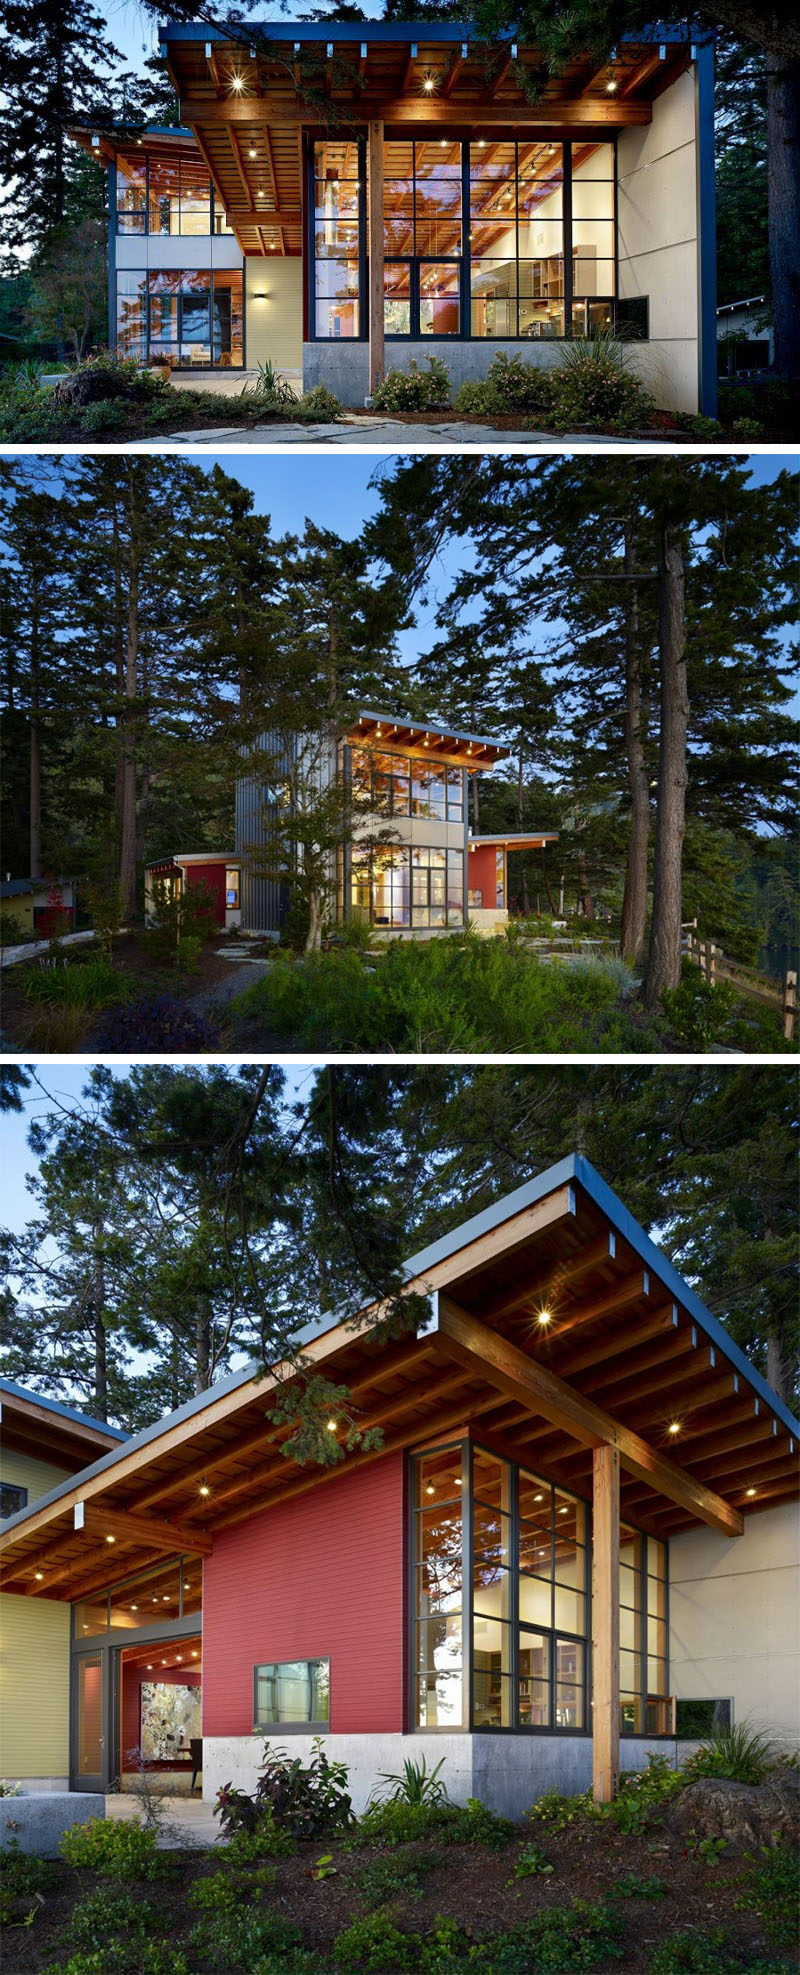 20 Awesome Examples Of Pacific Northwest Architecture // A wood beam structure, concrete slab foundation, and huge windows give this forest home a very west coast feel.